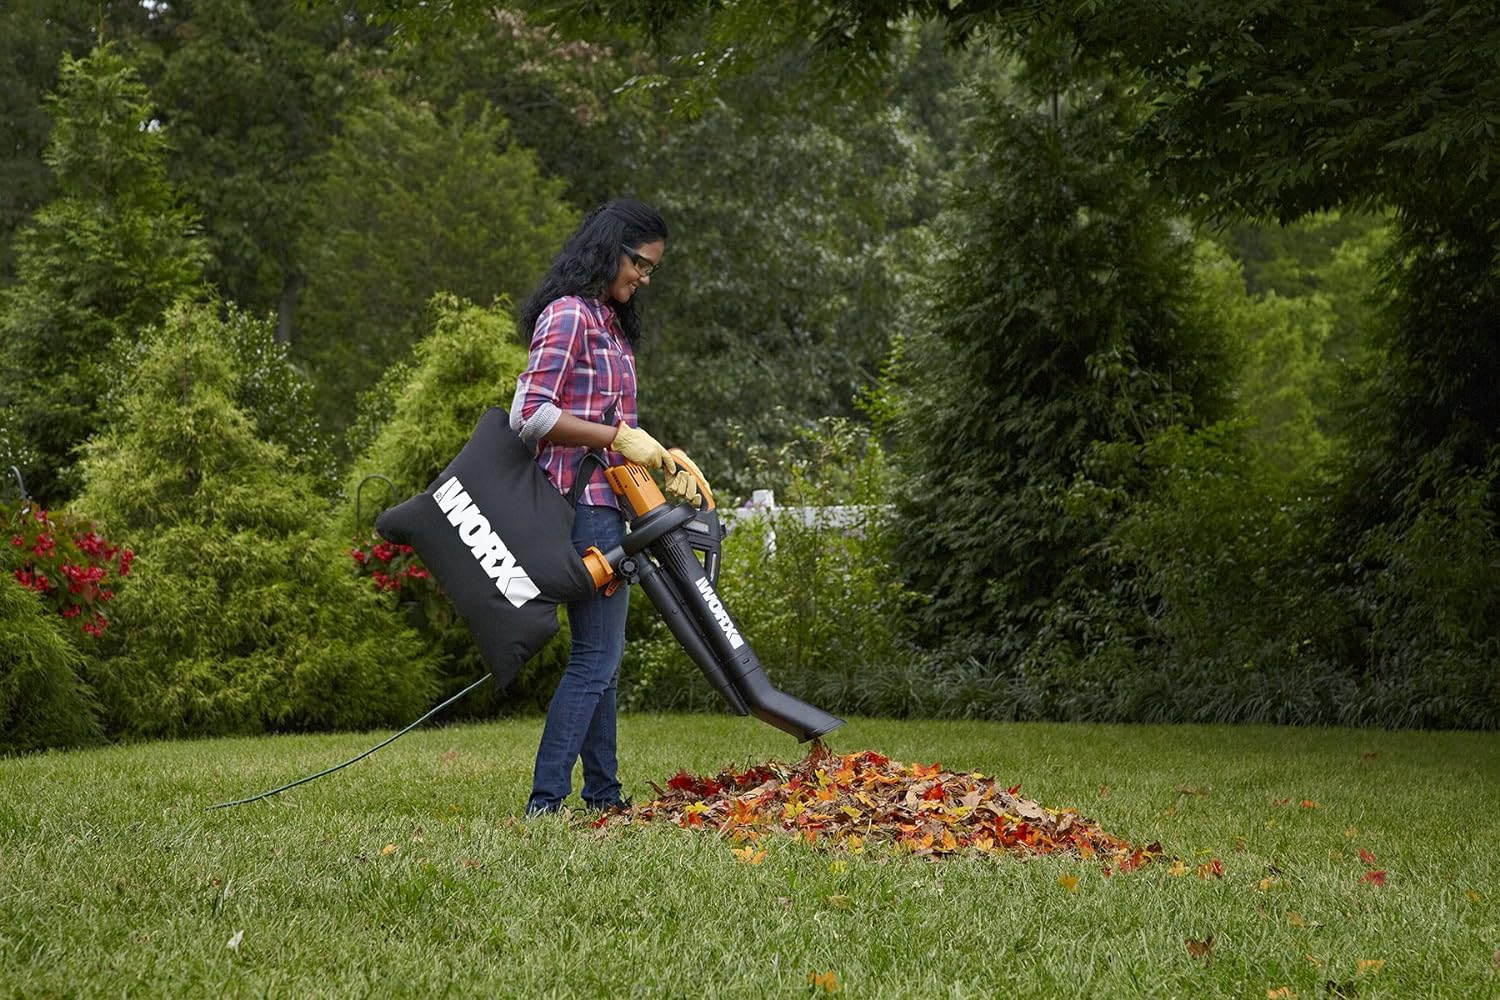 https://bigbigmart.com/wp-content/uploads/2023/10/WORX-WG509-12-Amp-TRIVAC-3-in-1-Electric-Leaf-Blower-with-All-Metal-Mulching-System8.jpg